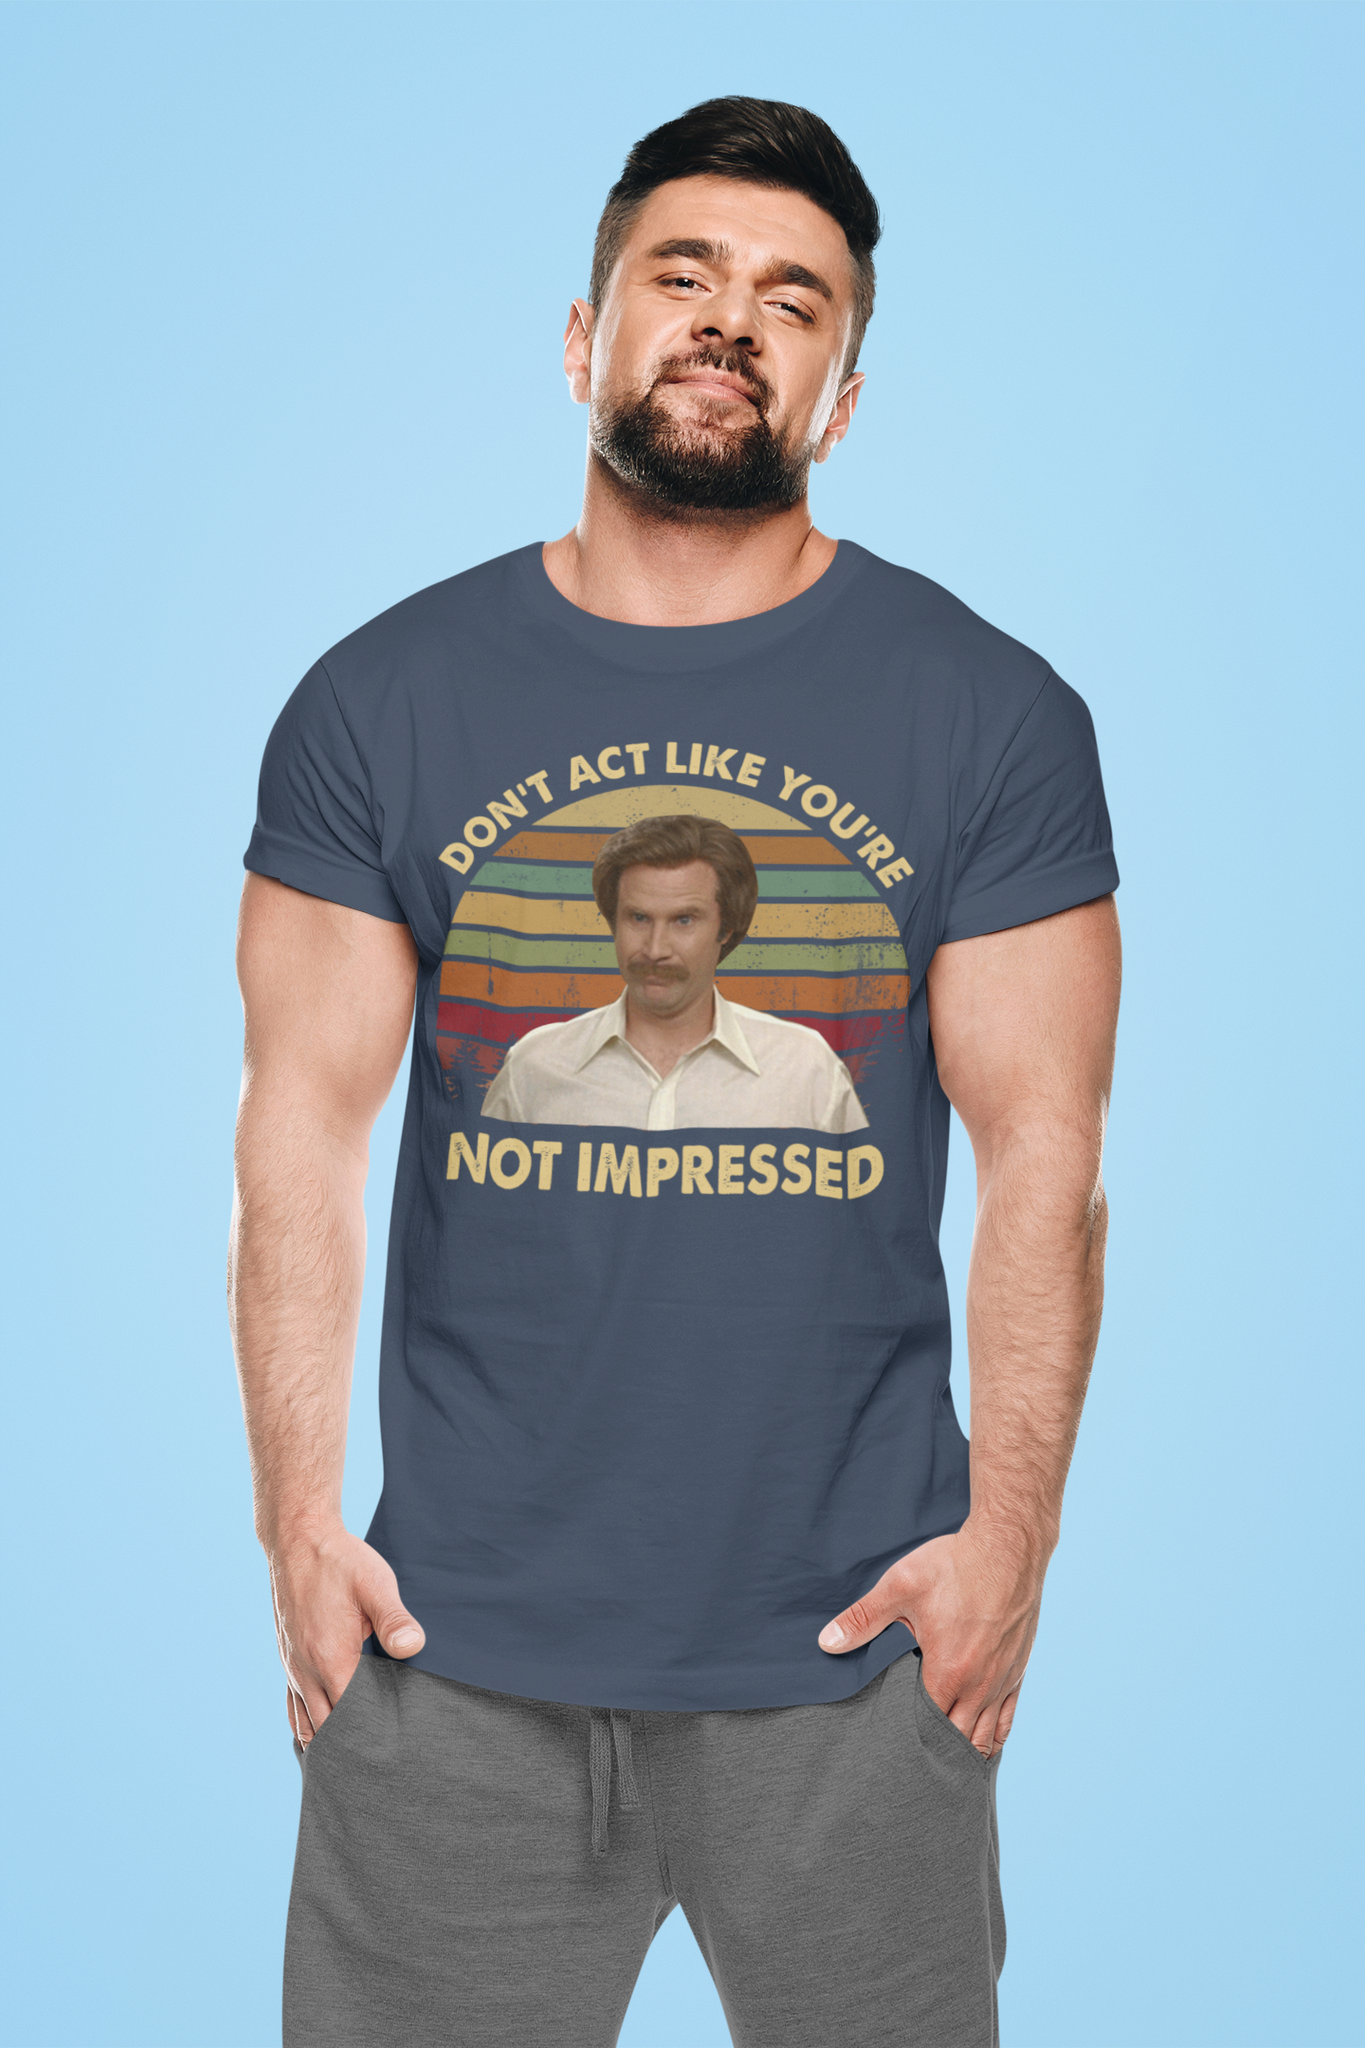 Anchorman Vintage T Shirt, Ron Burgundy T Shirt, Dont Act Like Youre Not Impressed Tshirt